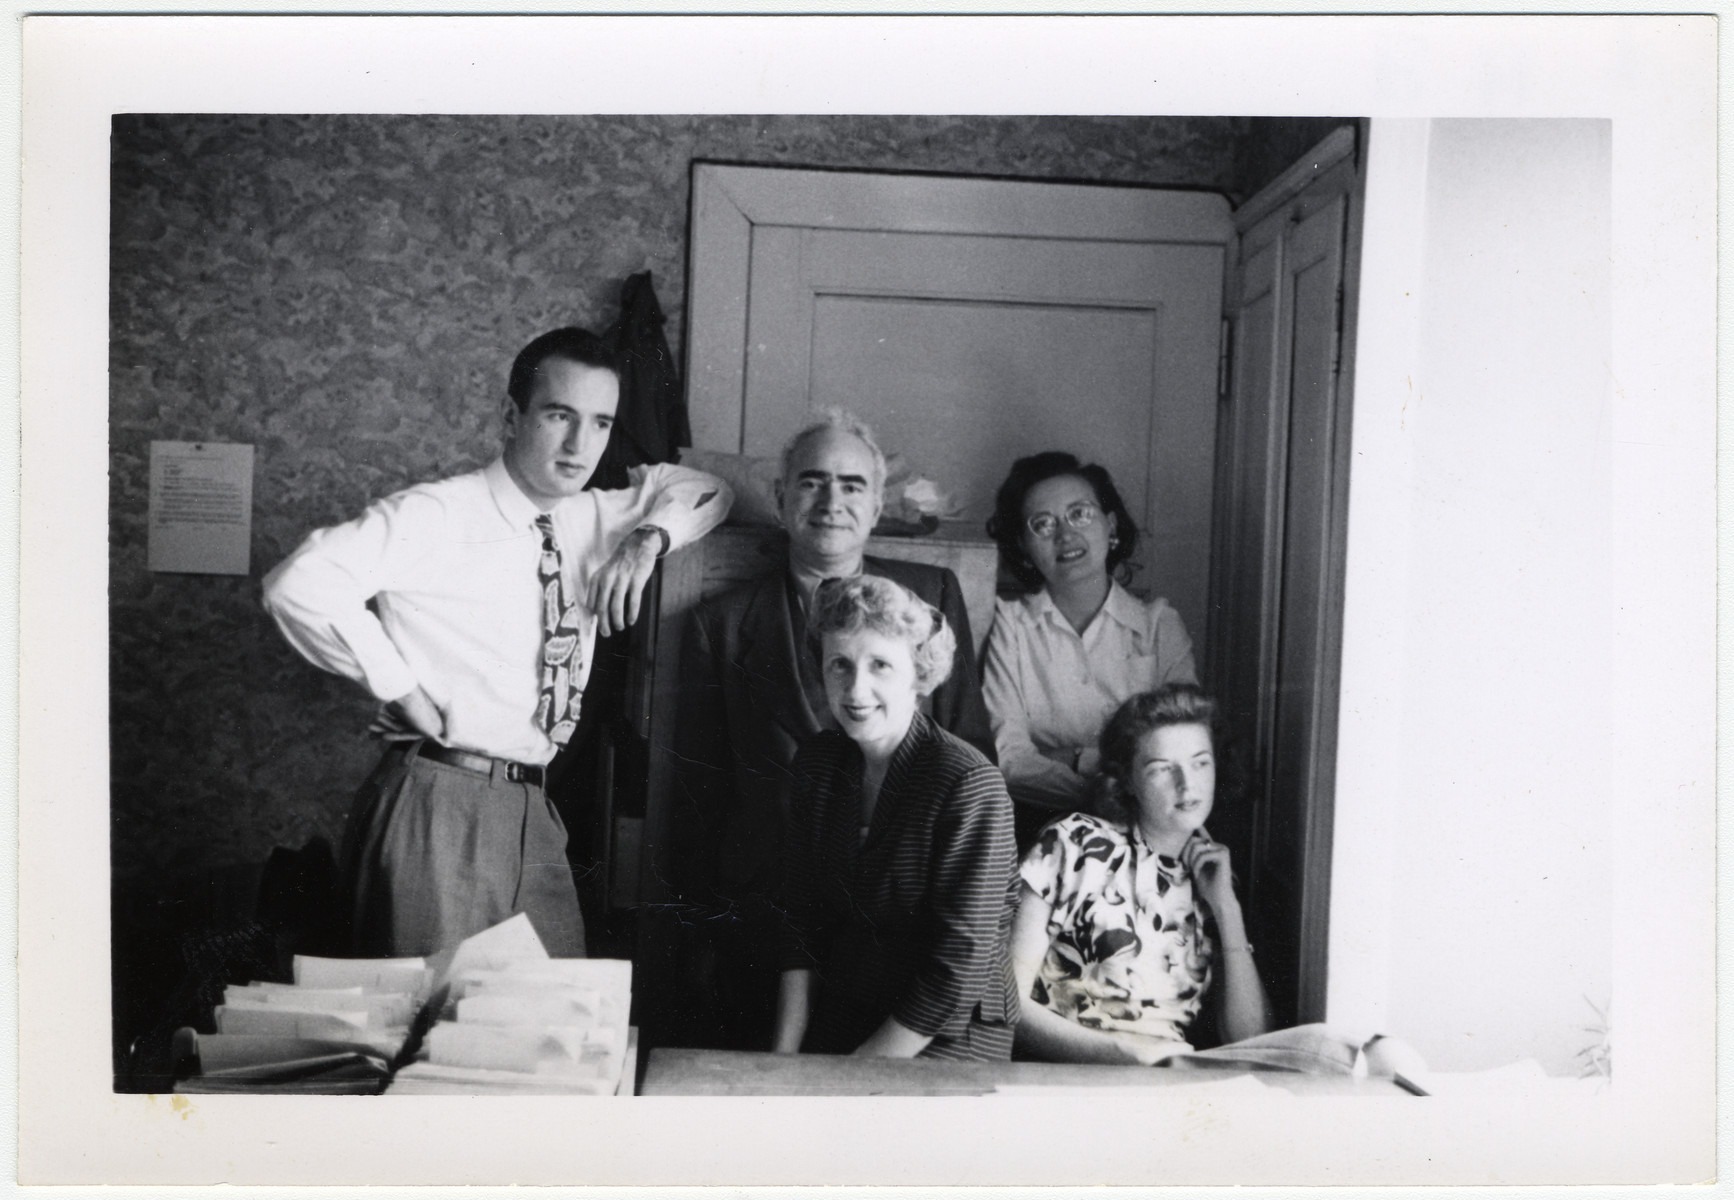 Maurice Levitt, a member of the Frankfurt Jewish GI Council, and four members of his staff work in their office in Bad Nauheim.

Maurice Levitt is standing in the center.  Else Jordan is in front of him.